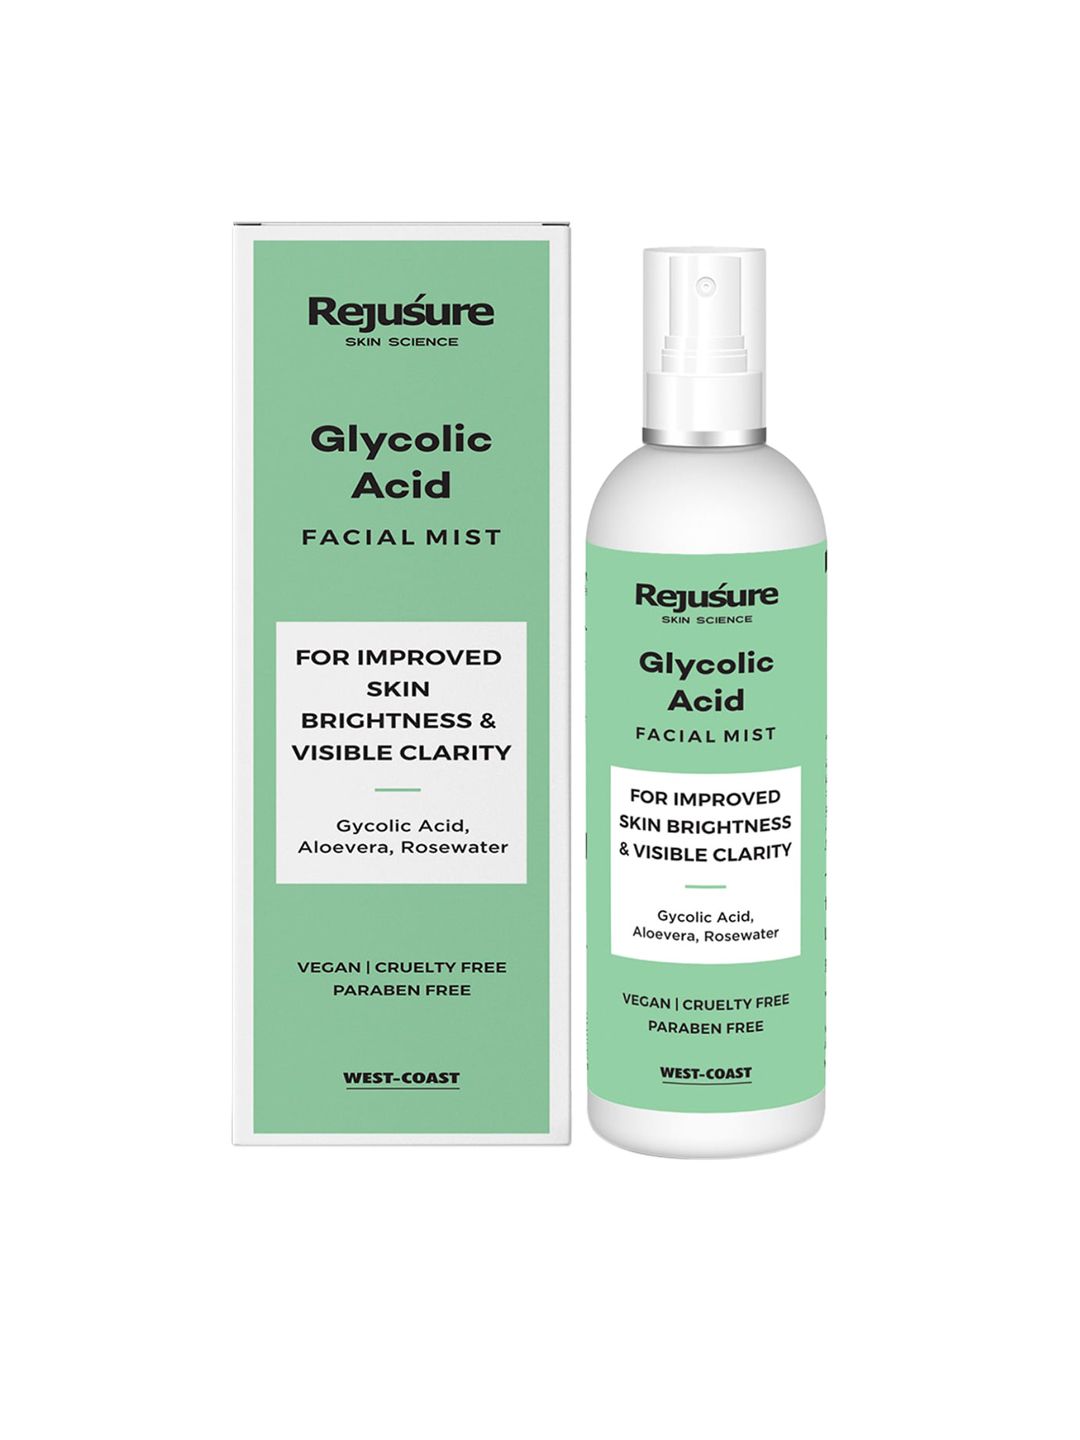 Rejusure Glycolic Acid Improved Skin Brightness & Visible Clarity Face Mist-100ml Price in India